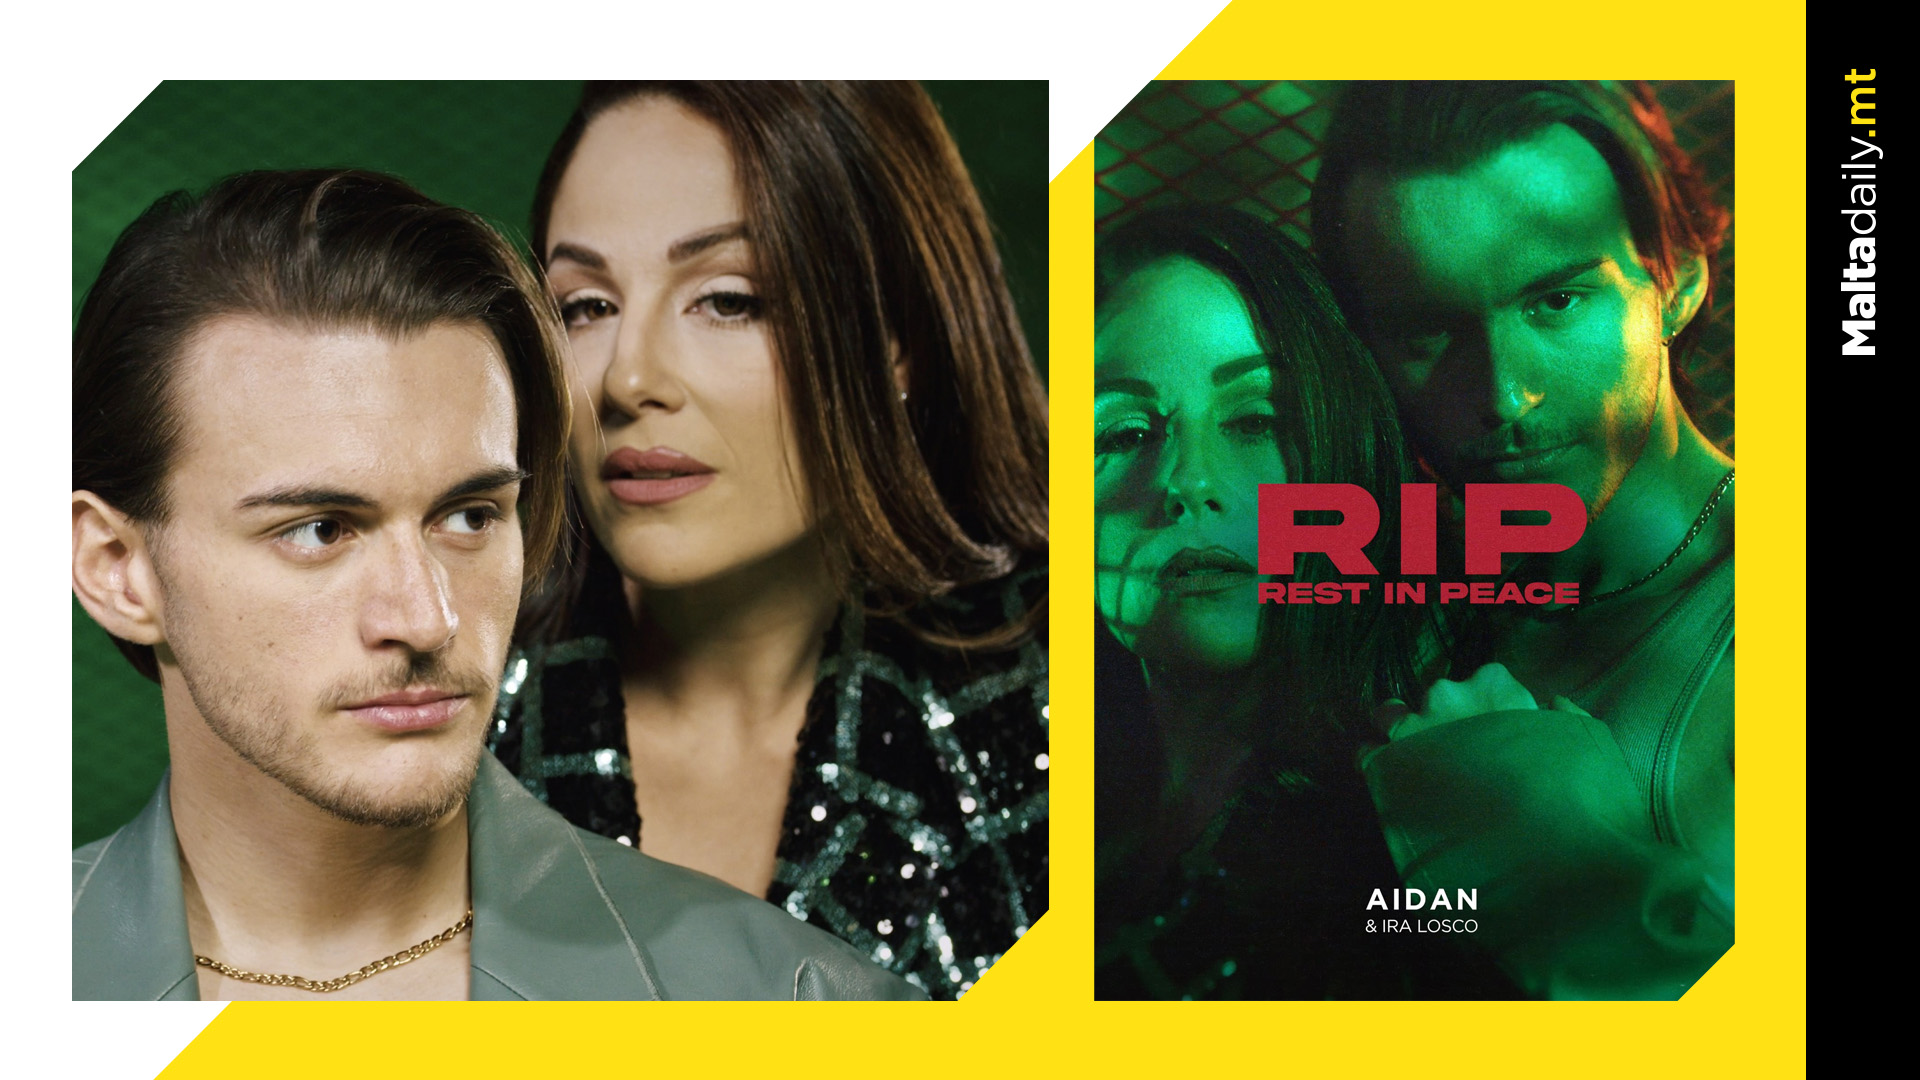 AIDAN & Ira Losco come together for local pop banger 'Rip (Rest in Peace)'